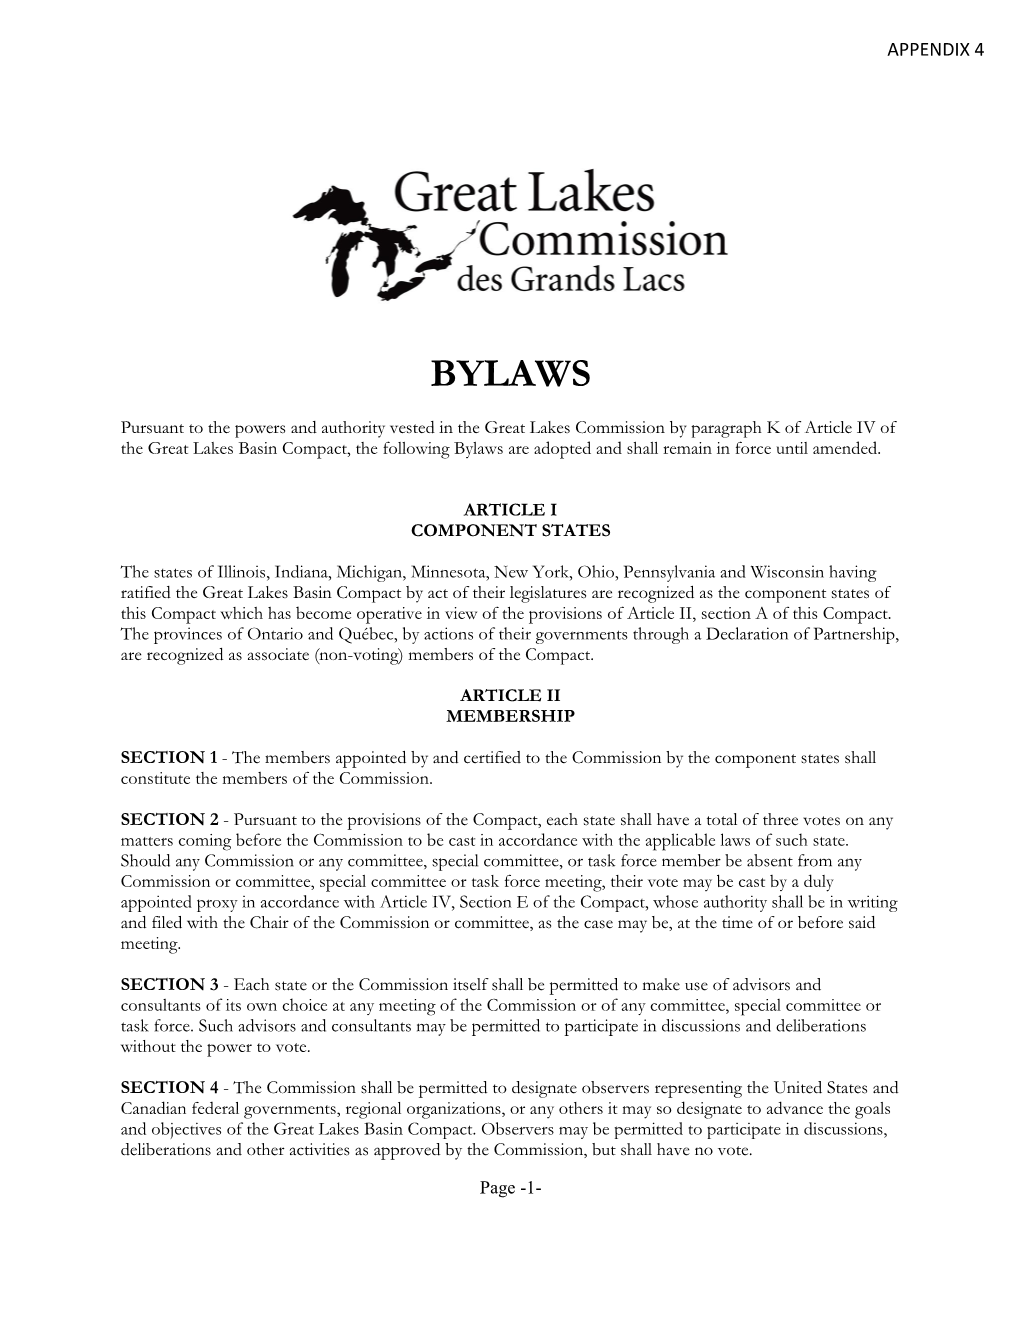 Great Lakes Commission Bylaws